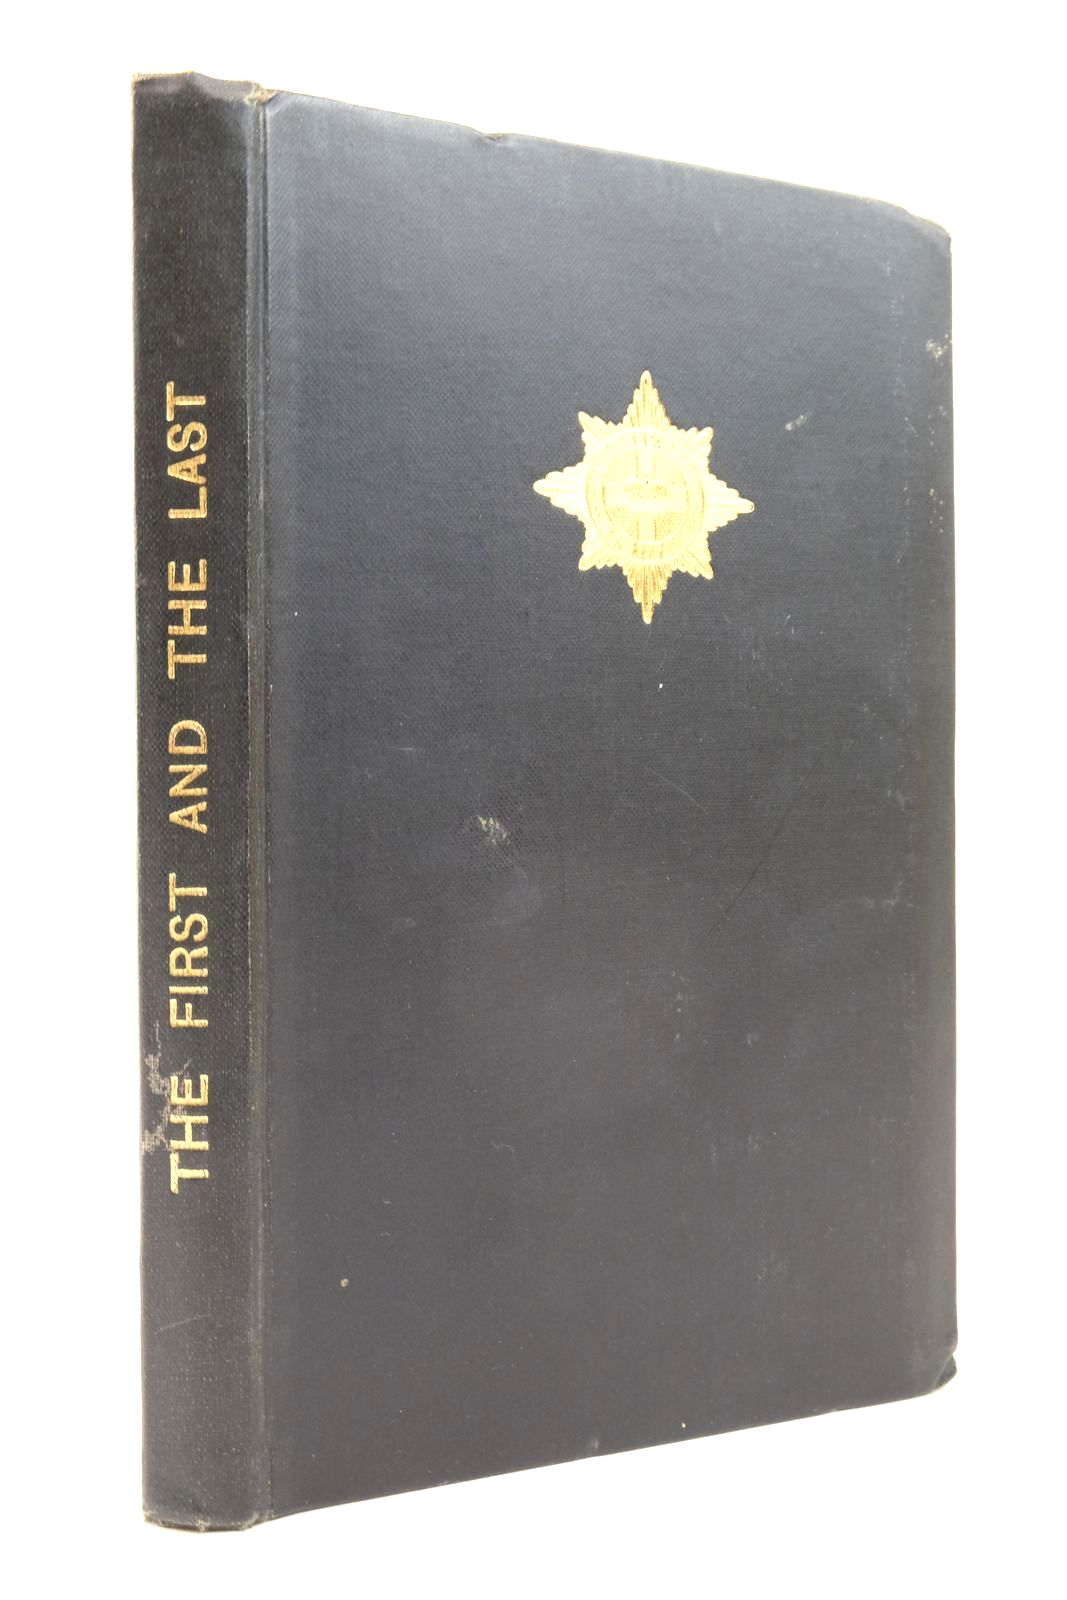 Photo of THE FIRST AND THE LAST: THE STORY OF THE 4TH/7TH ROYAL DRAGOON GUARDS 1939 - 1945 written by Stirling, J.D.P. illustrated by Oxley, S. published by Art &amp; Educational Publishers Limited (STOCK CODE: 2137728)  for sale by Stella & Rose's Books